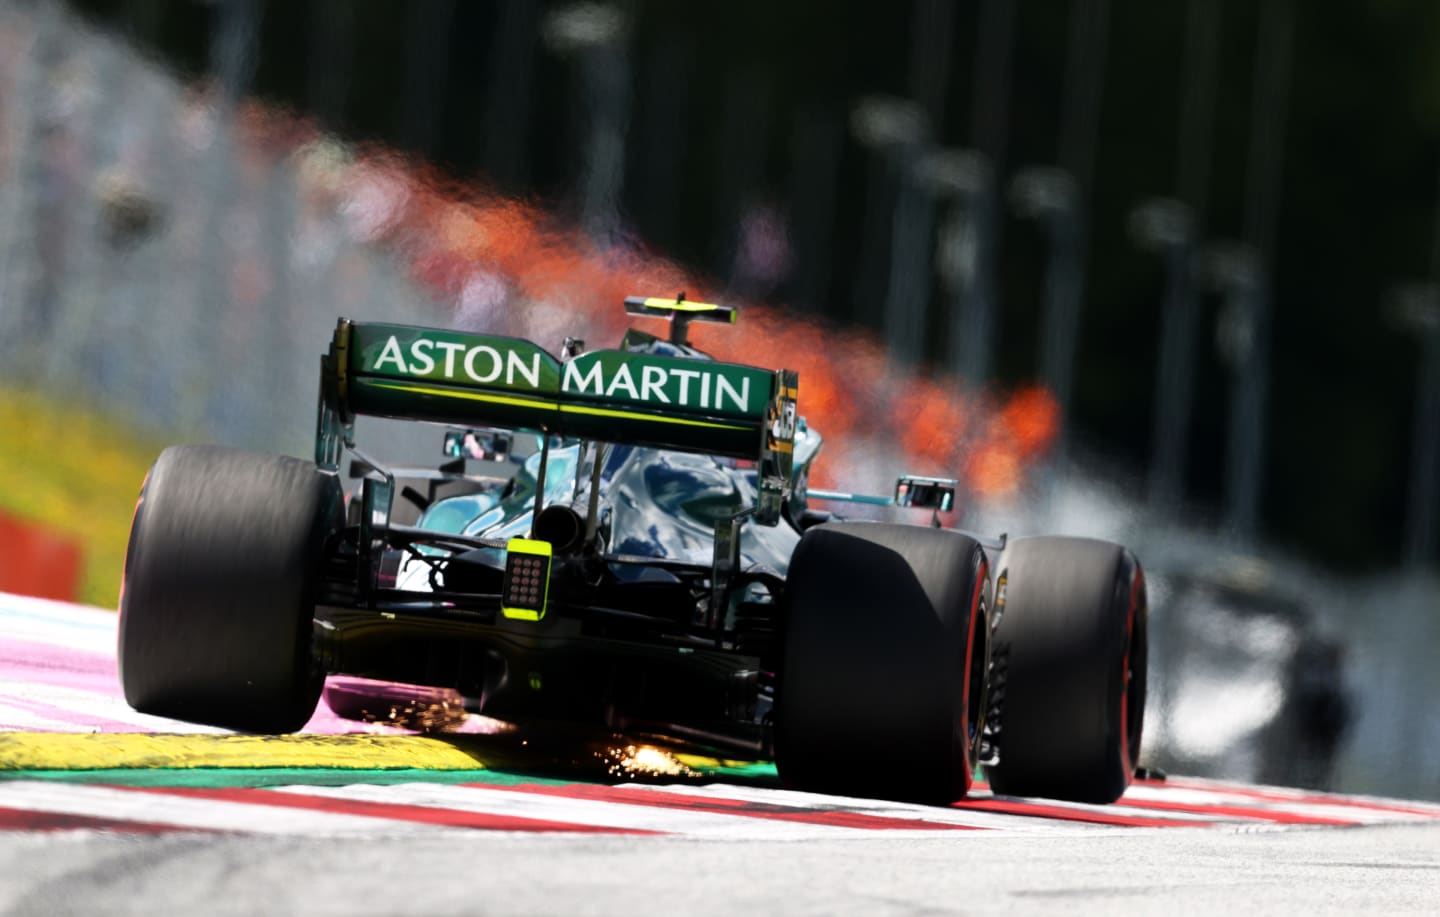 SPIELBERG, AUSTRIA - JUNE 26: Sebastian Vettel of Germany driving the (5) Aston Martin AMR21 Mercedes on track during qualifying ahead of the F1 Grand Prix of Styria at Red Bull Ring on June 26, 2021 in Spielberg, Austria. (Photo by Clive Rose/Getty Images)